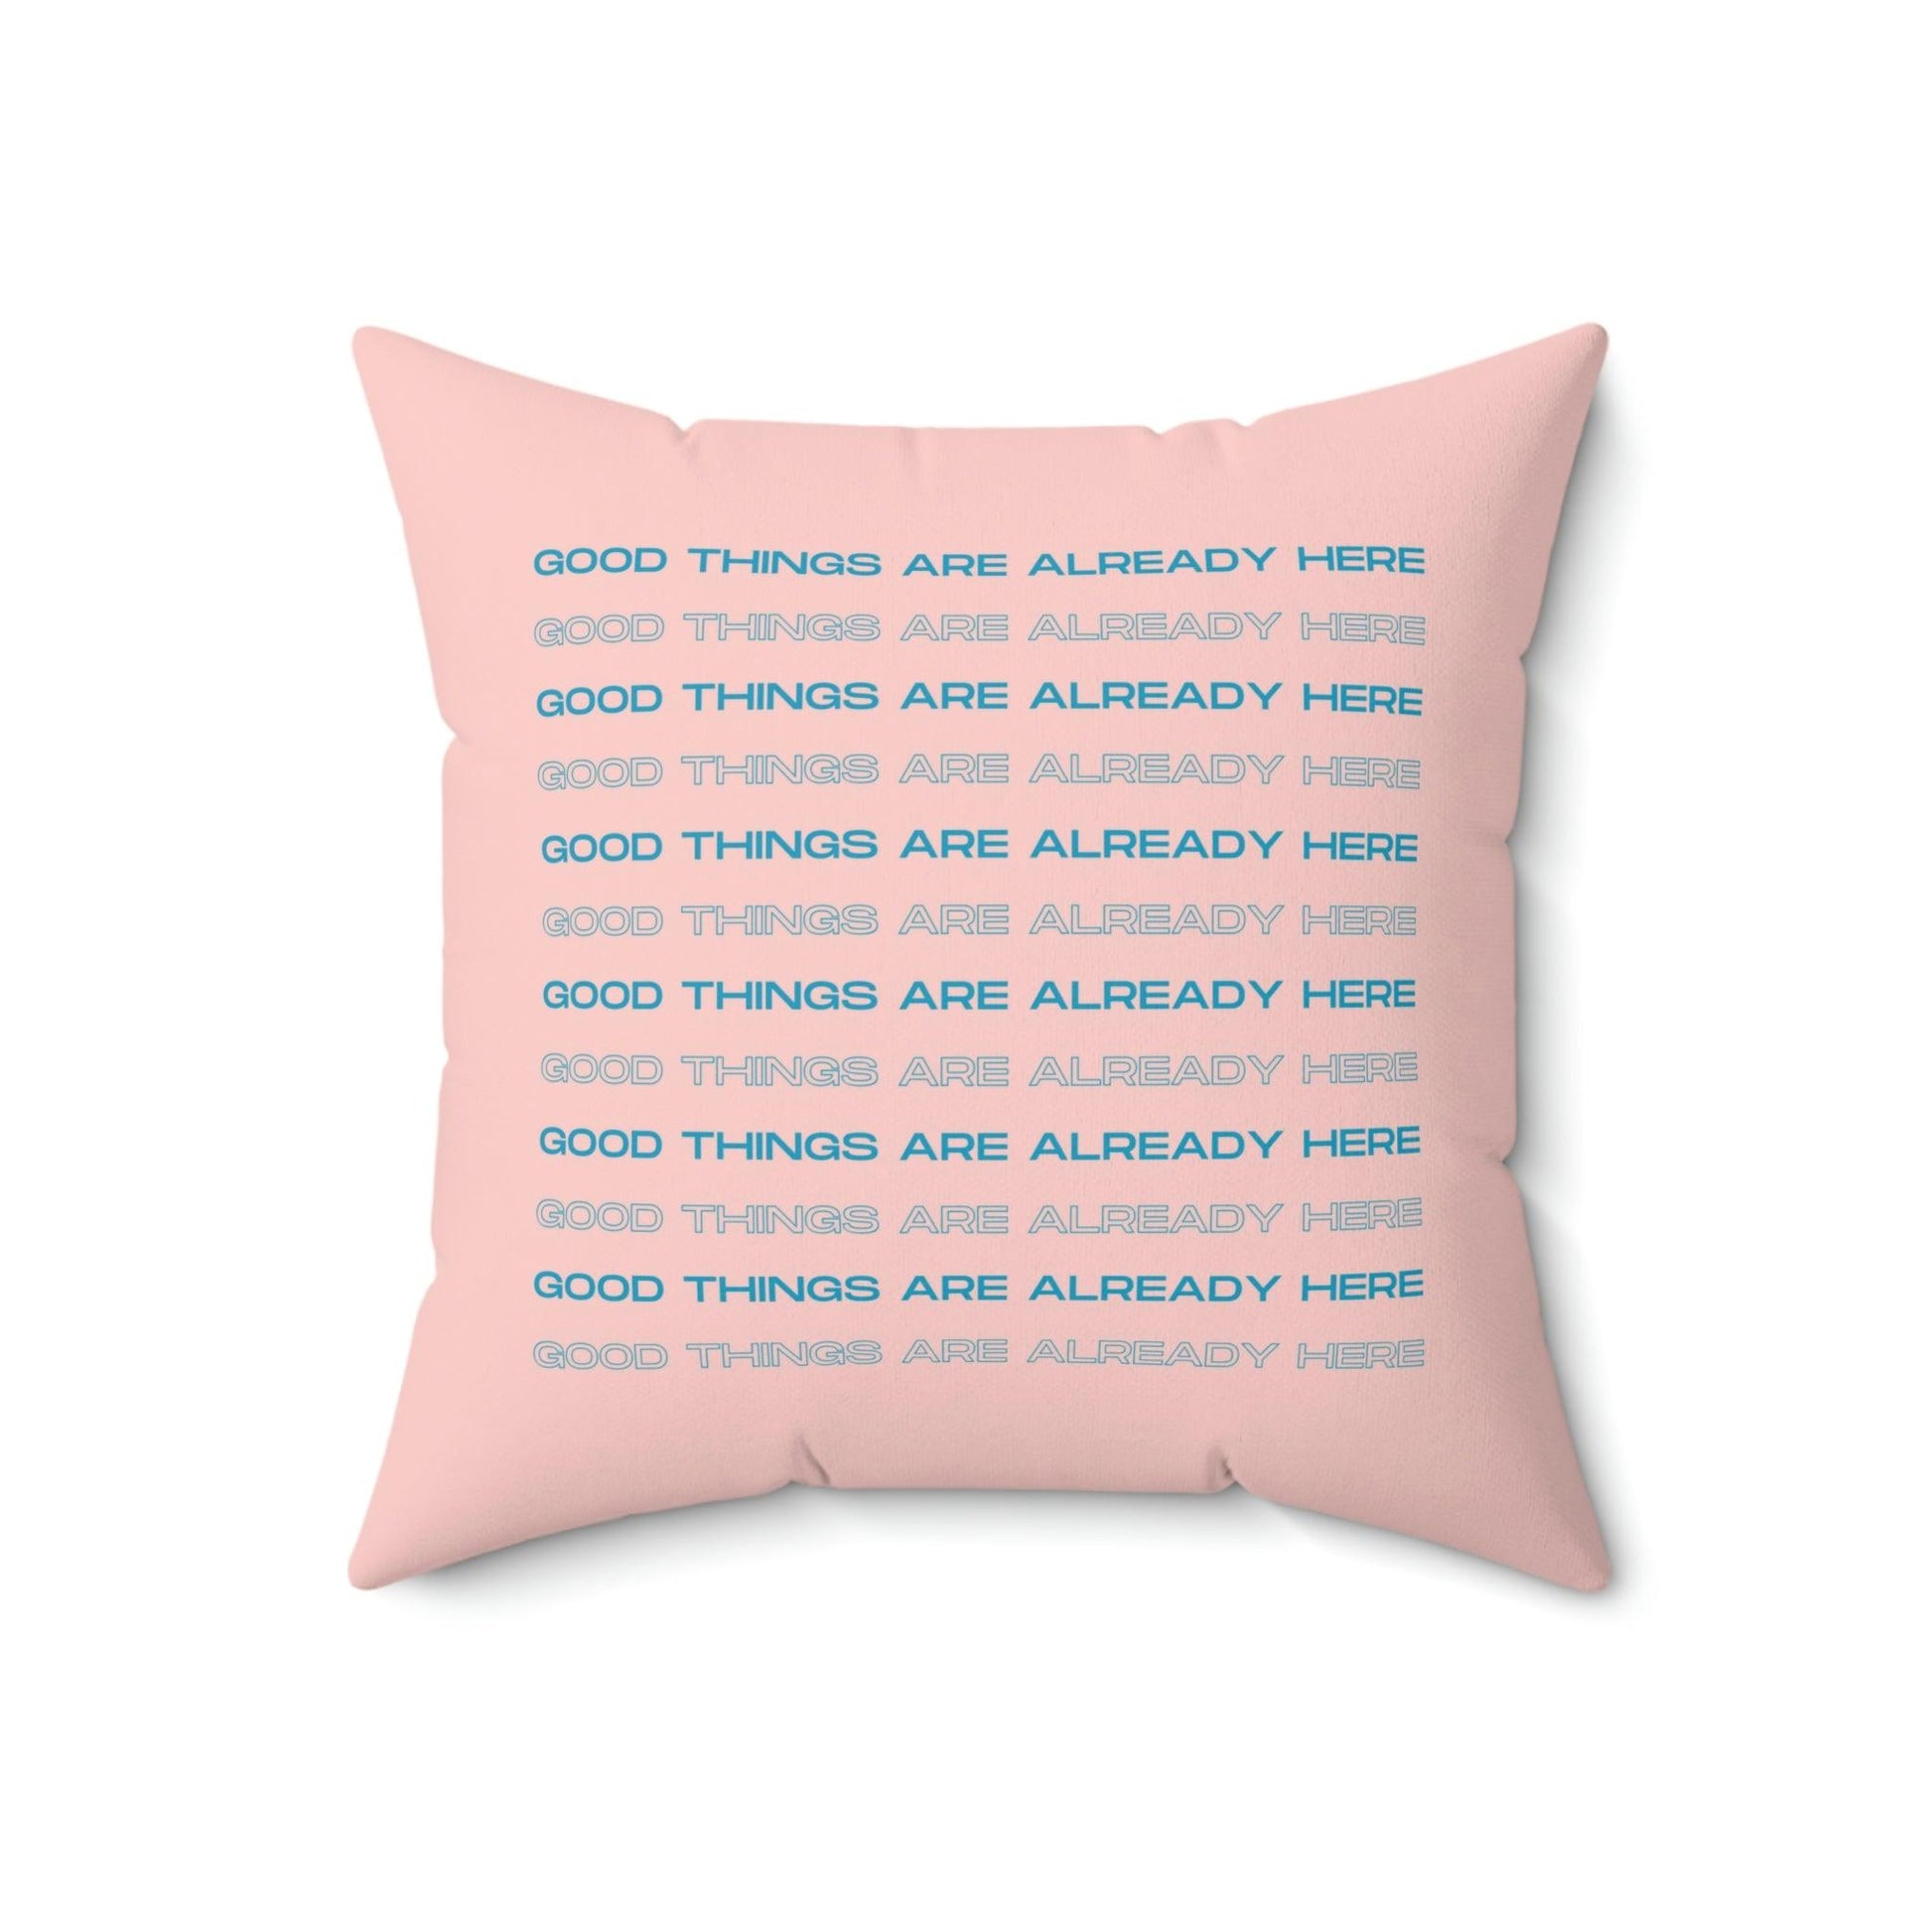 Good Things Are Already Here Printed Throw Pillow - MAIA HOMES